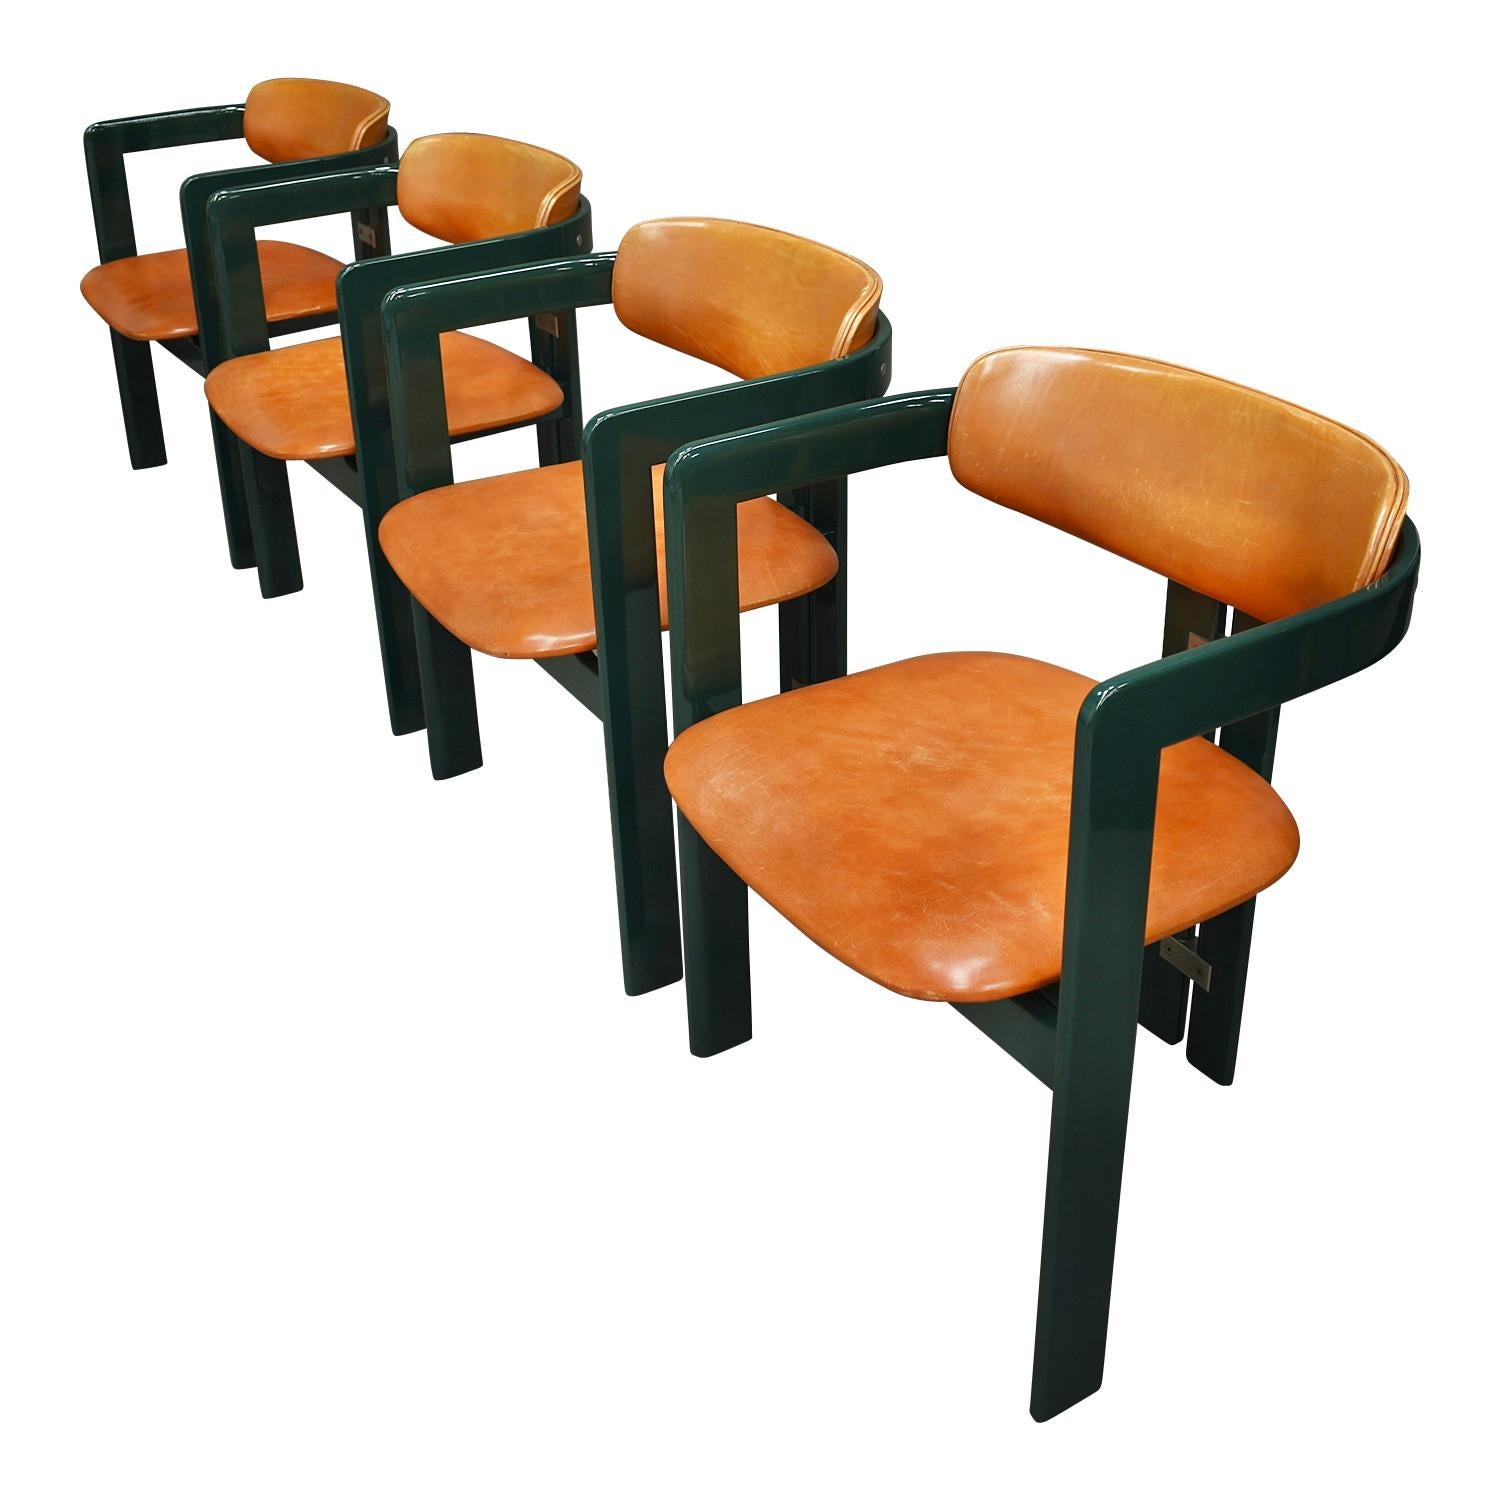 Rare set of green Pamplona chairs by Augusto Savini for Pozzi, Italy, 1965.

The chairs have a beautiful dark green high gloss lacquered bentwood base with amazing tan or cognac leather upholstery and solid aluminum details, all still original!